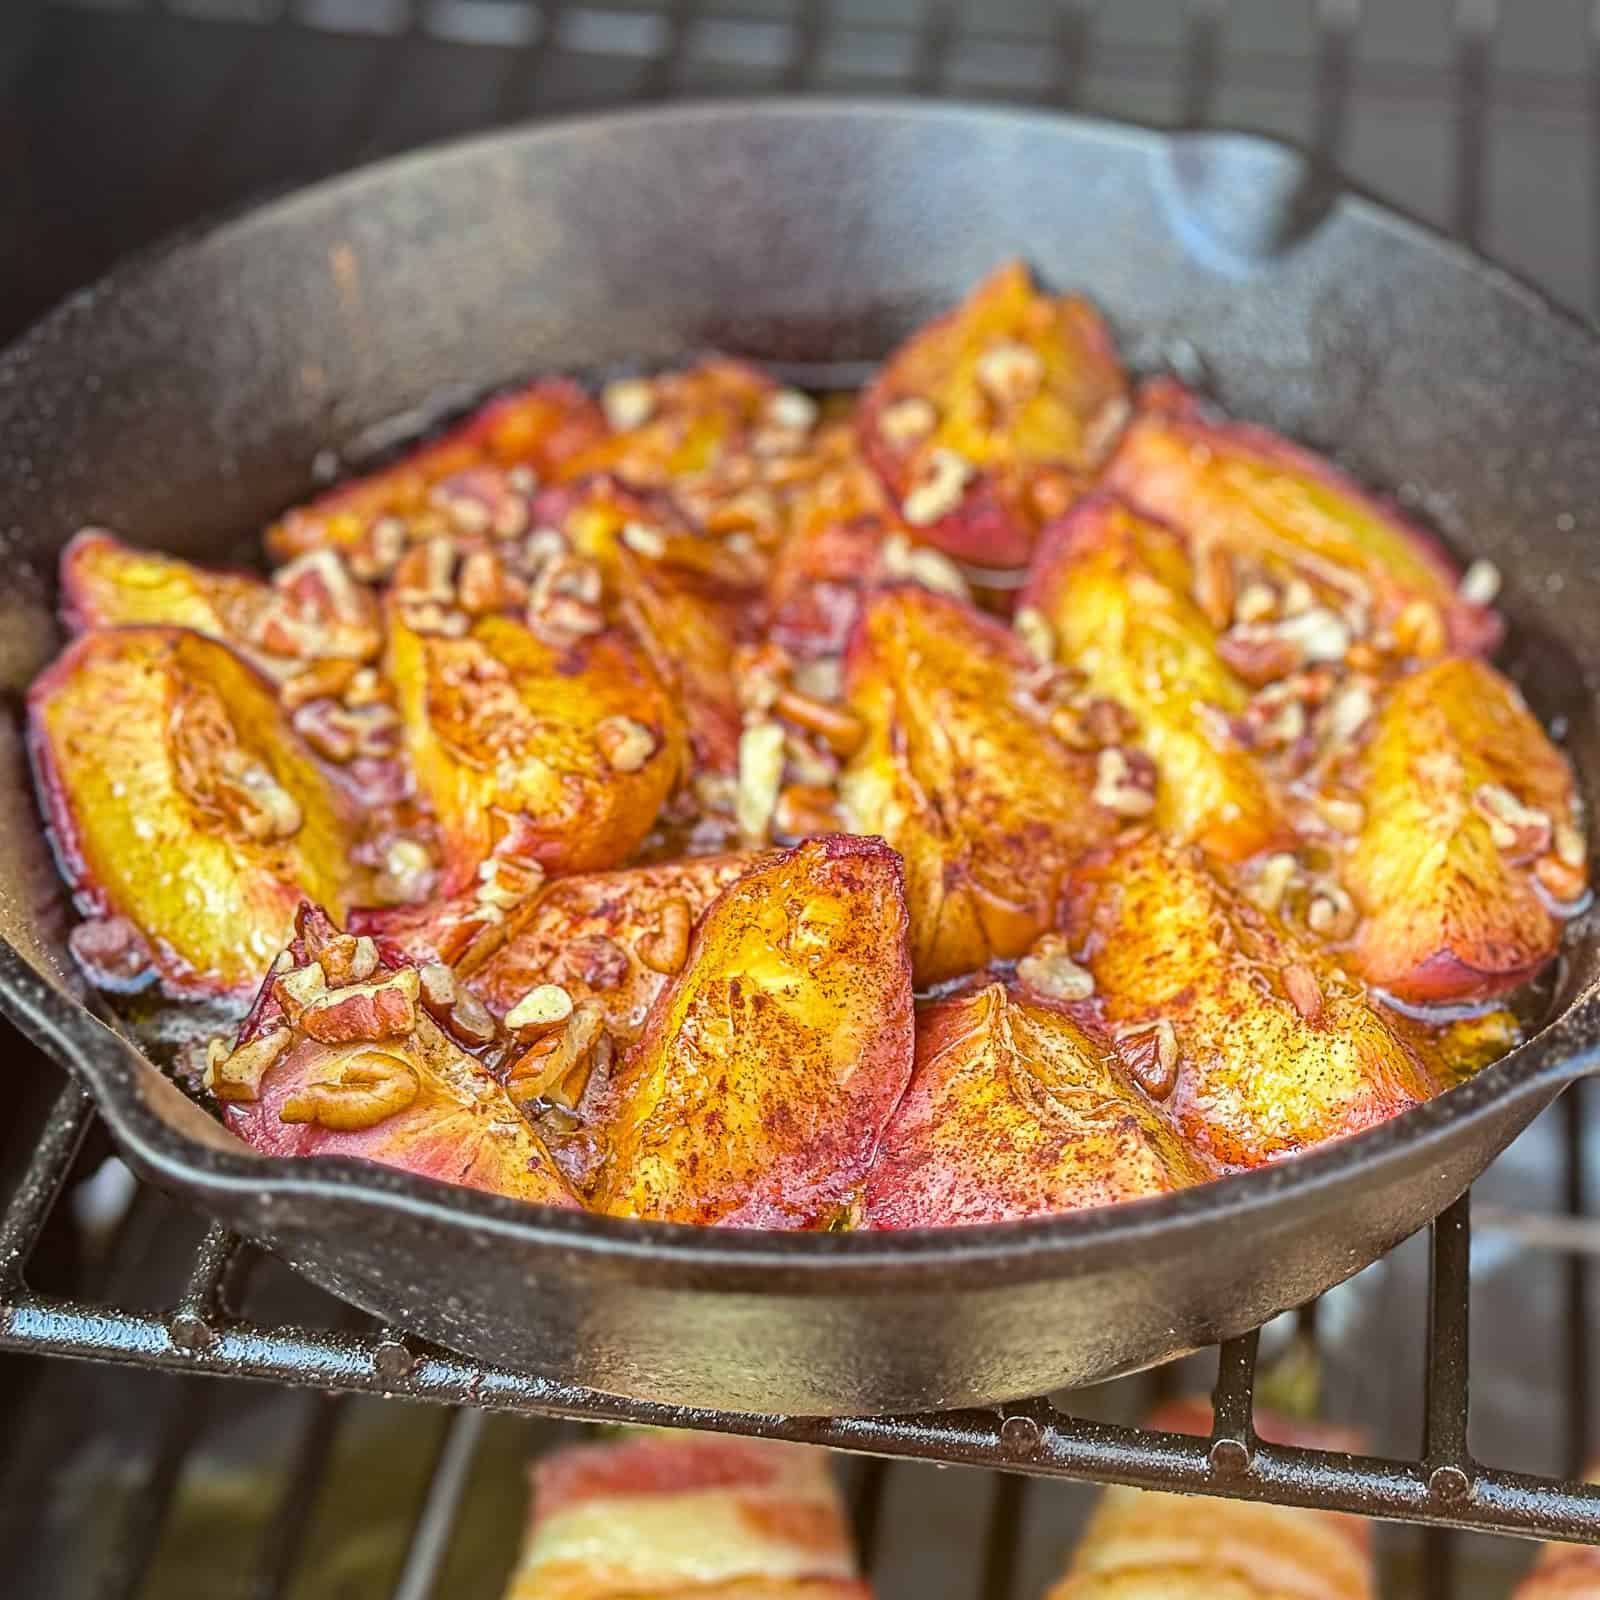 Traeger Smoked Cinnamon Peaches With Pecans